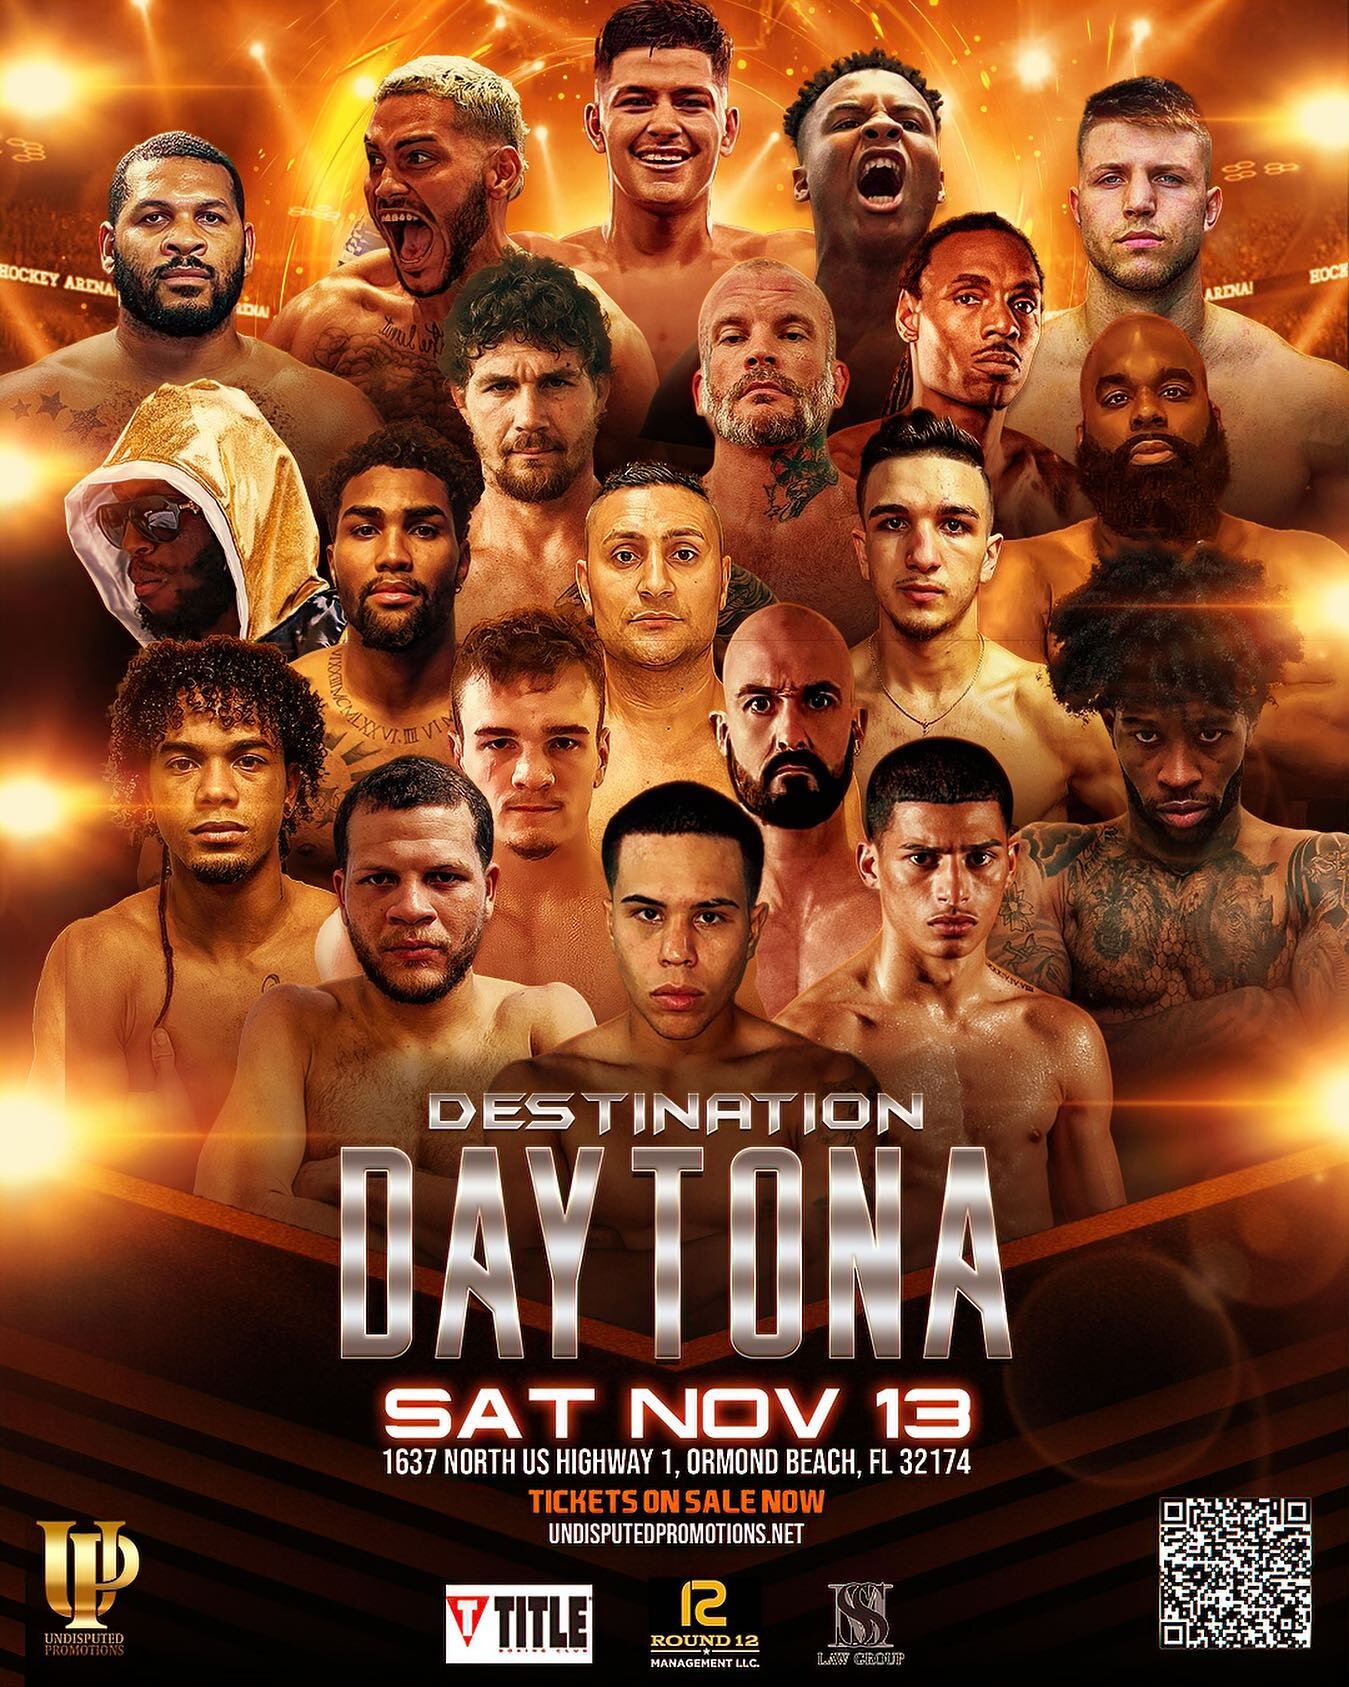 THE COUNTDOWN IS ON!!! WE ARE JUST DAYS AWAY BEFORE UNDISPUTED PROMOTIONS HITS DAYTONA BEACH!!!! 
💥
WE HAVE A STACKED FIGHT CARD, FULL OF FIGHTERS THAT HAVE BEEN WORKING LIKE NEVER BEFORE TO PUT ON A PREFORMANCE THE FIGHT FANS WONT EVER FORGET‼️‼️ 
